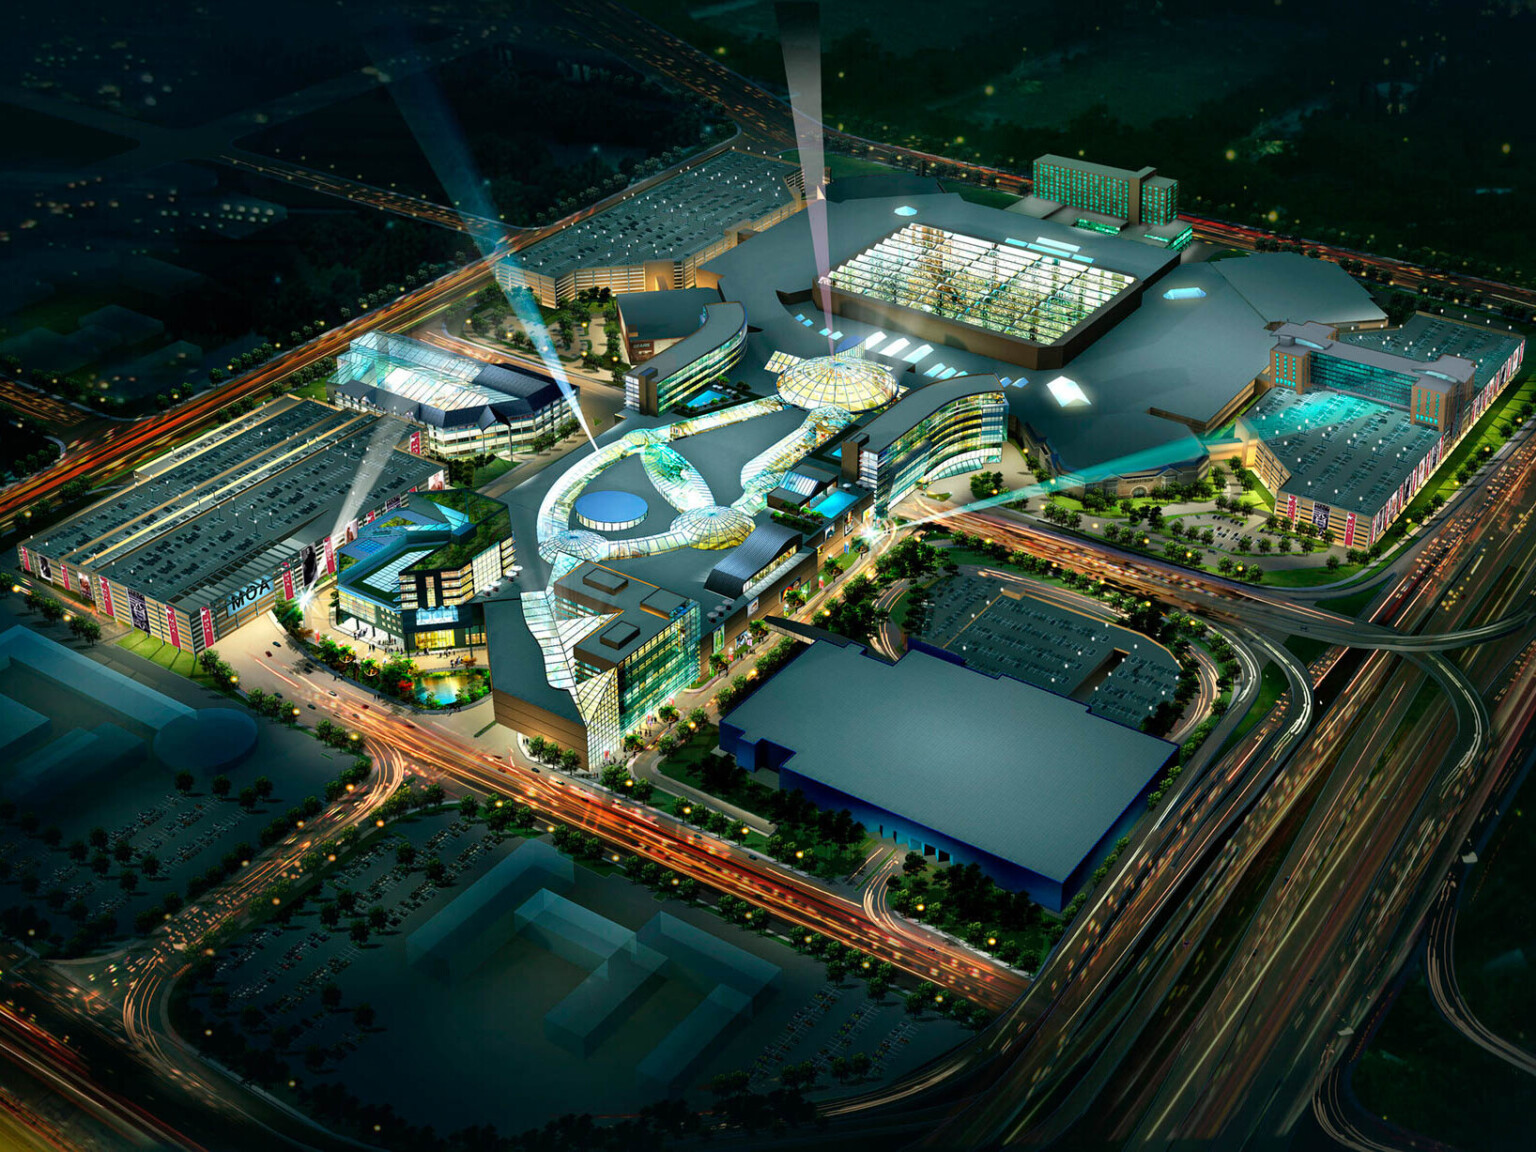 Rendering of the Mall of America at nighttime with spotlights and buildings with bright lights